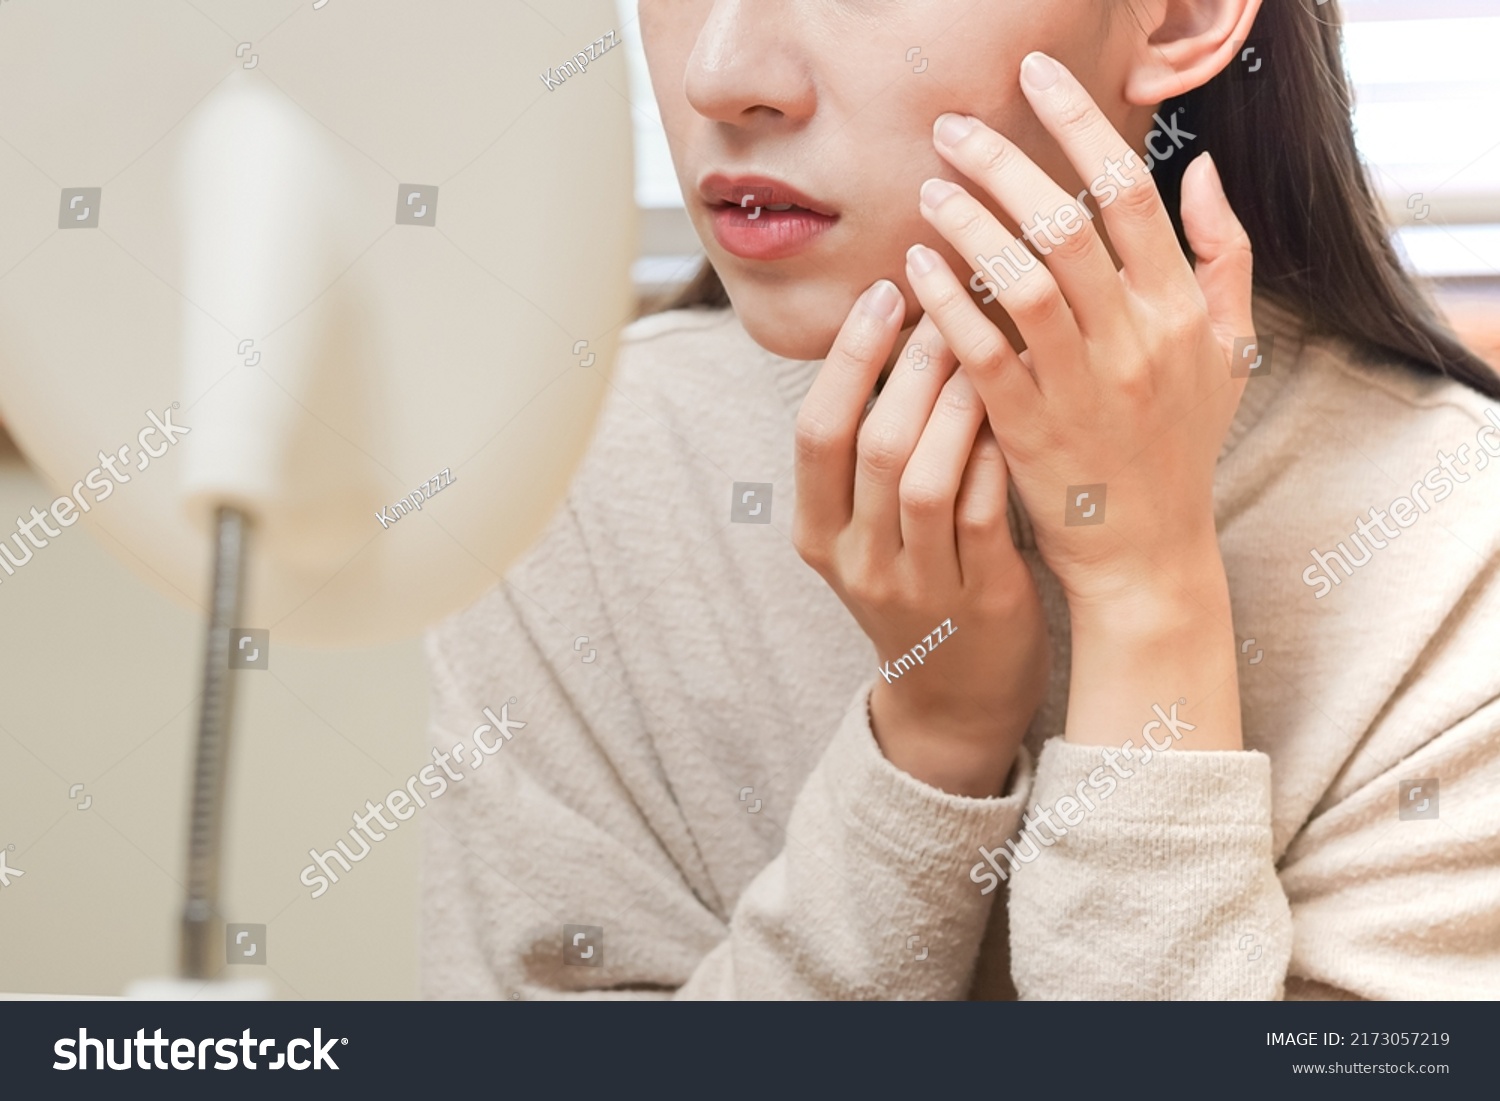 Dermatology, puberty asian young woman, girl looking into mirror, allergy presenting an allergic reaction from cosmetic, red spot or  rash on face. Beauty care from skin problem by medical treatment. #2173057219